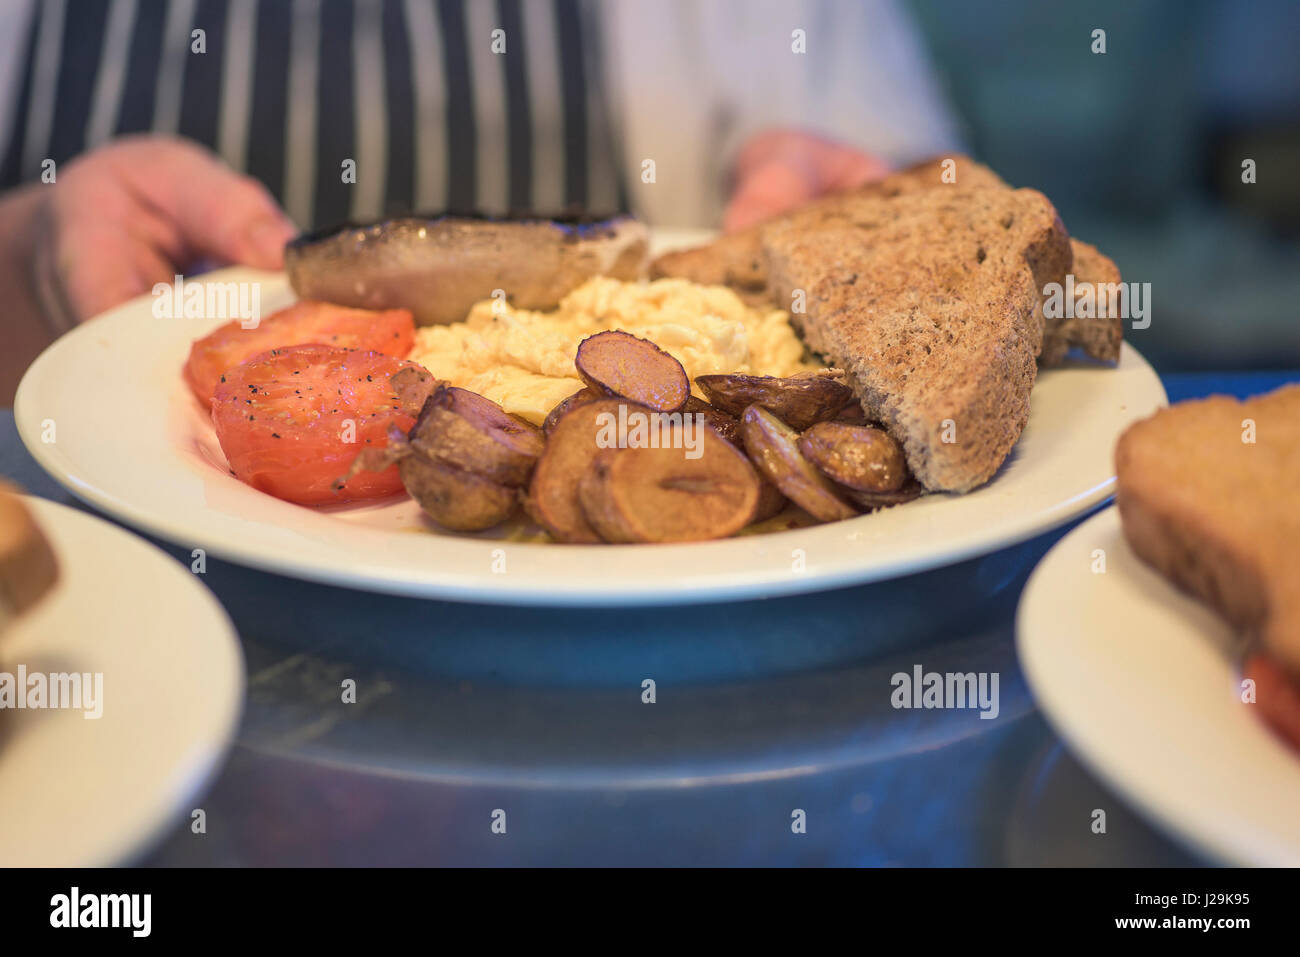 Breakfast Fry up Food Plate of food Fried food Serving Served Stock Photo